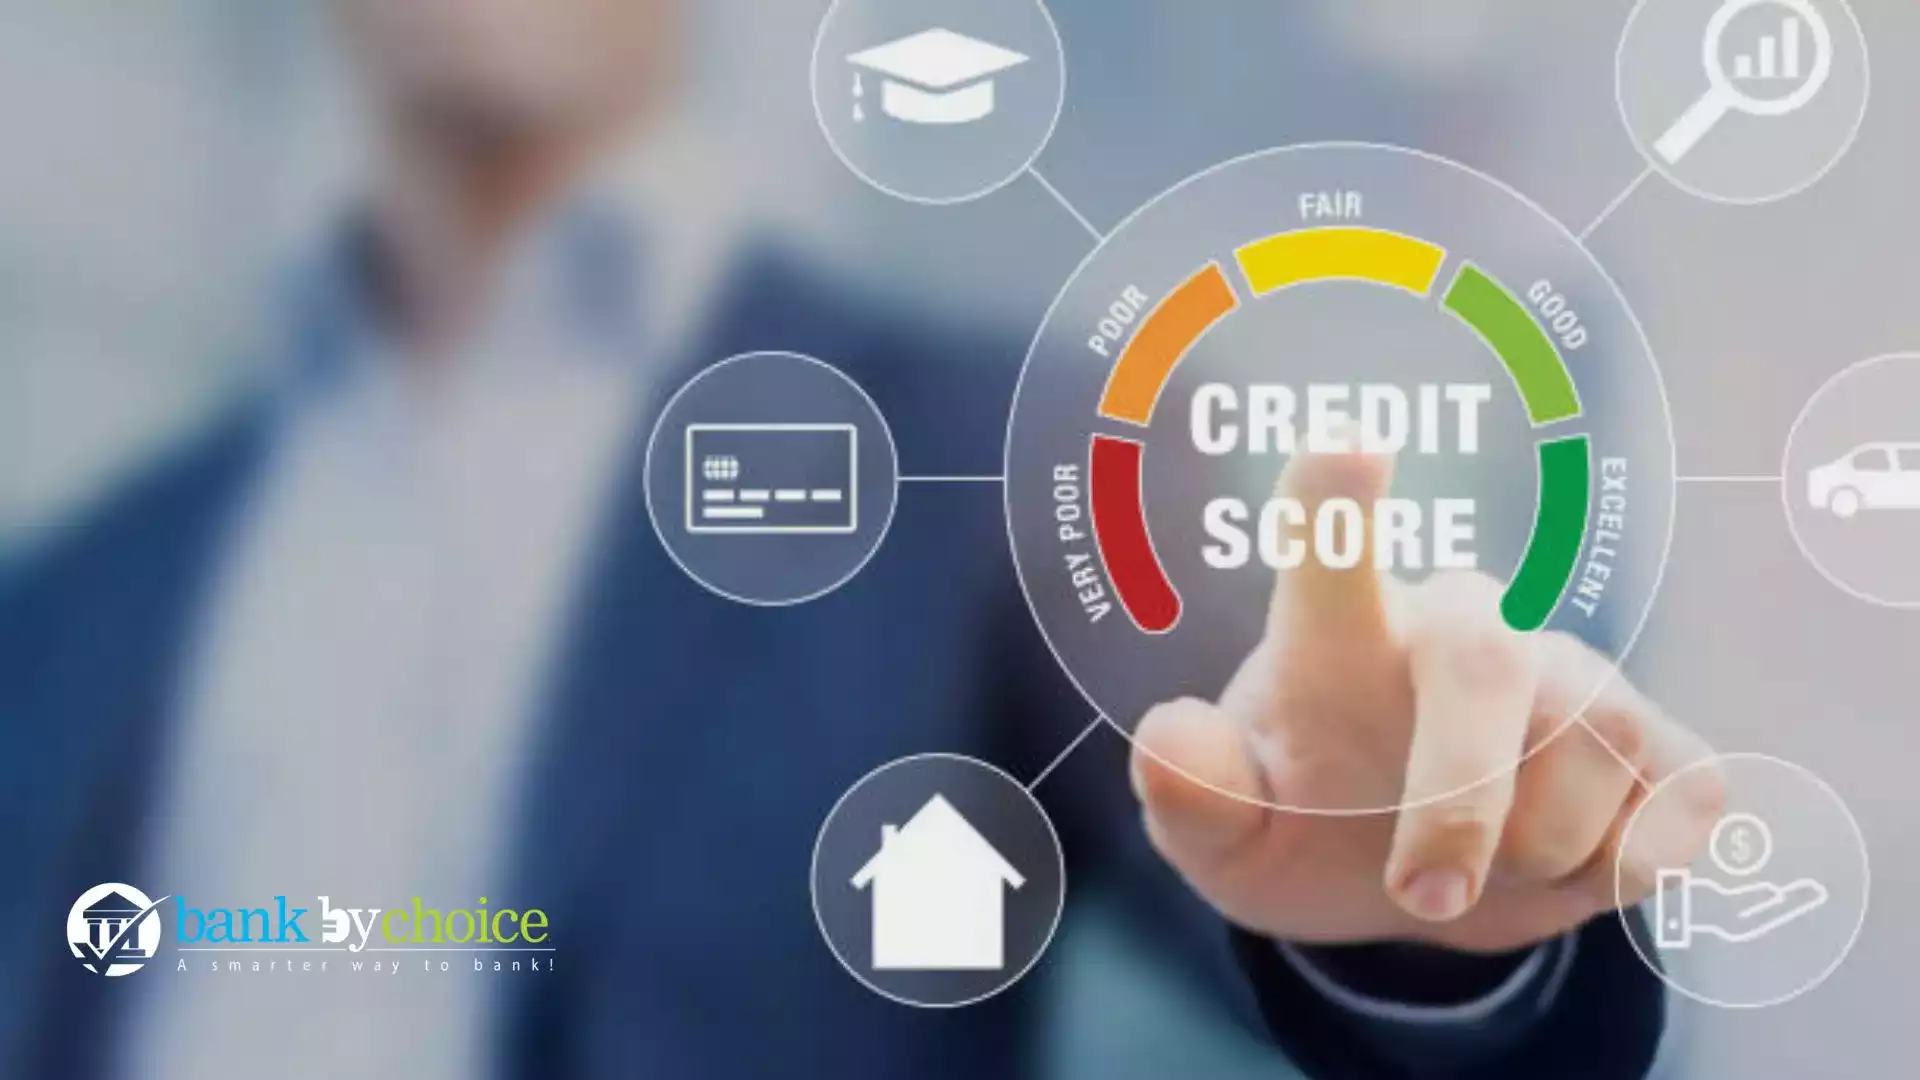 Check AECB Credit Score for free- Bankbychoice